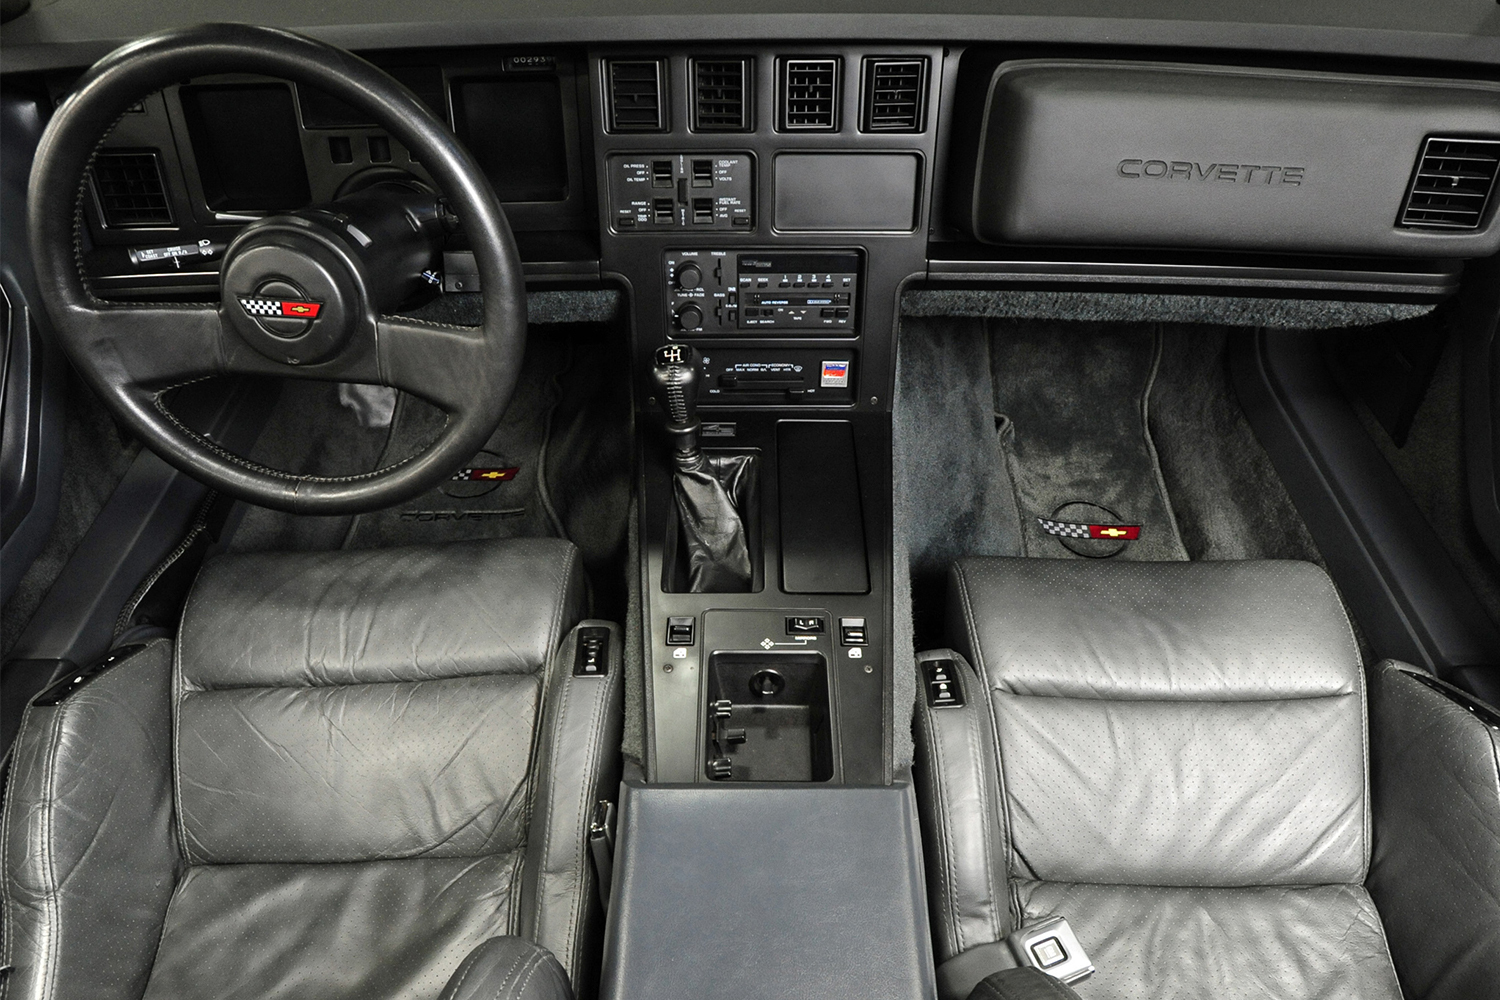 The interior of a 1986 Chevrolet Corvette C4 with black throughout and the Corvette logo on the steering wheel